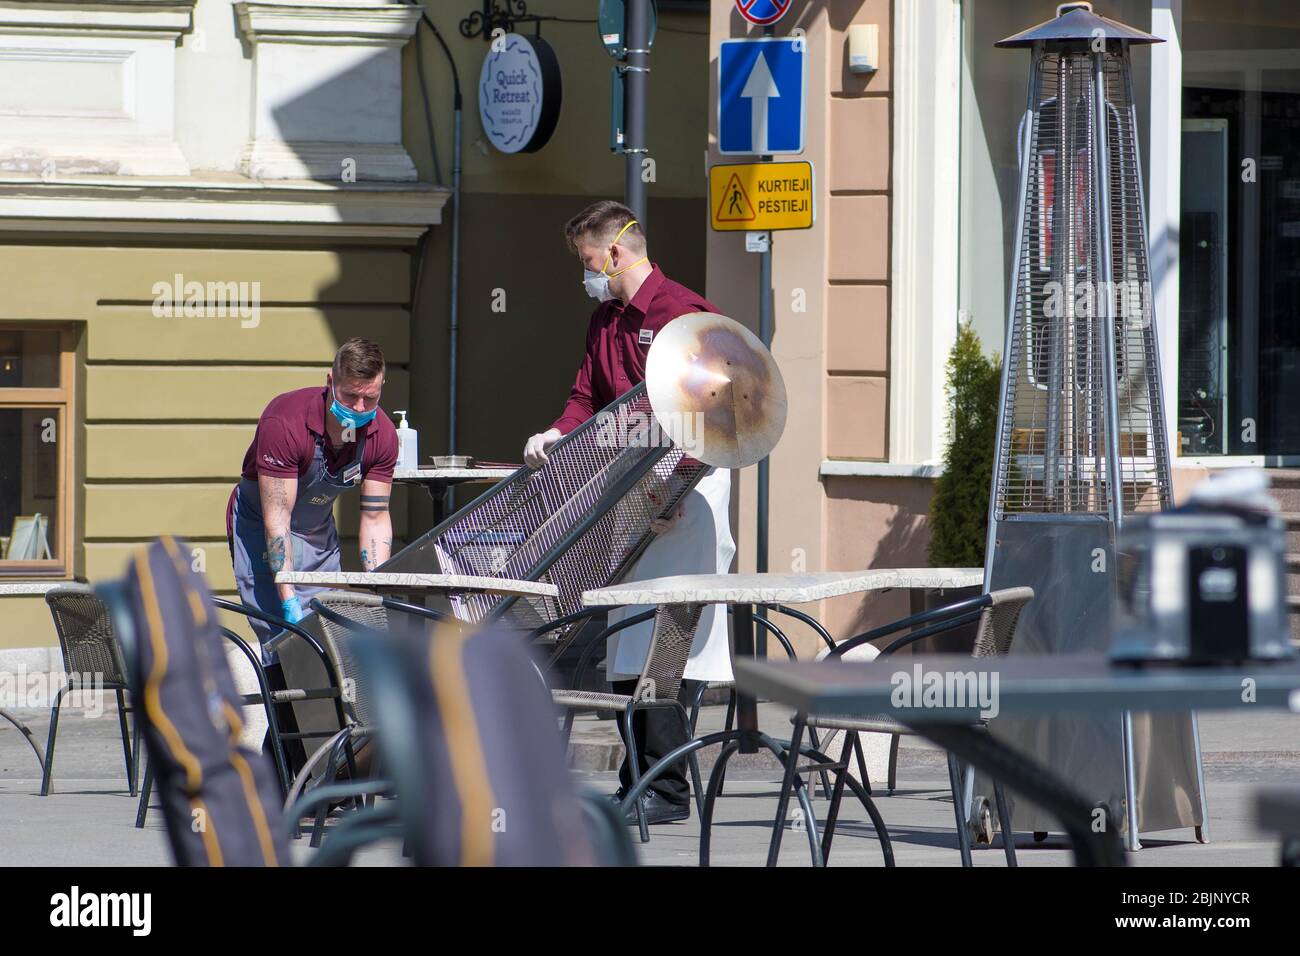 Waiters with a mask reopen an outdoor bar, café or restaurant after quarantine restrictions Stock Photo